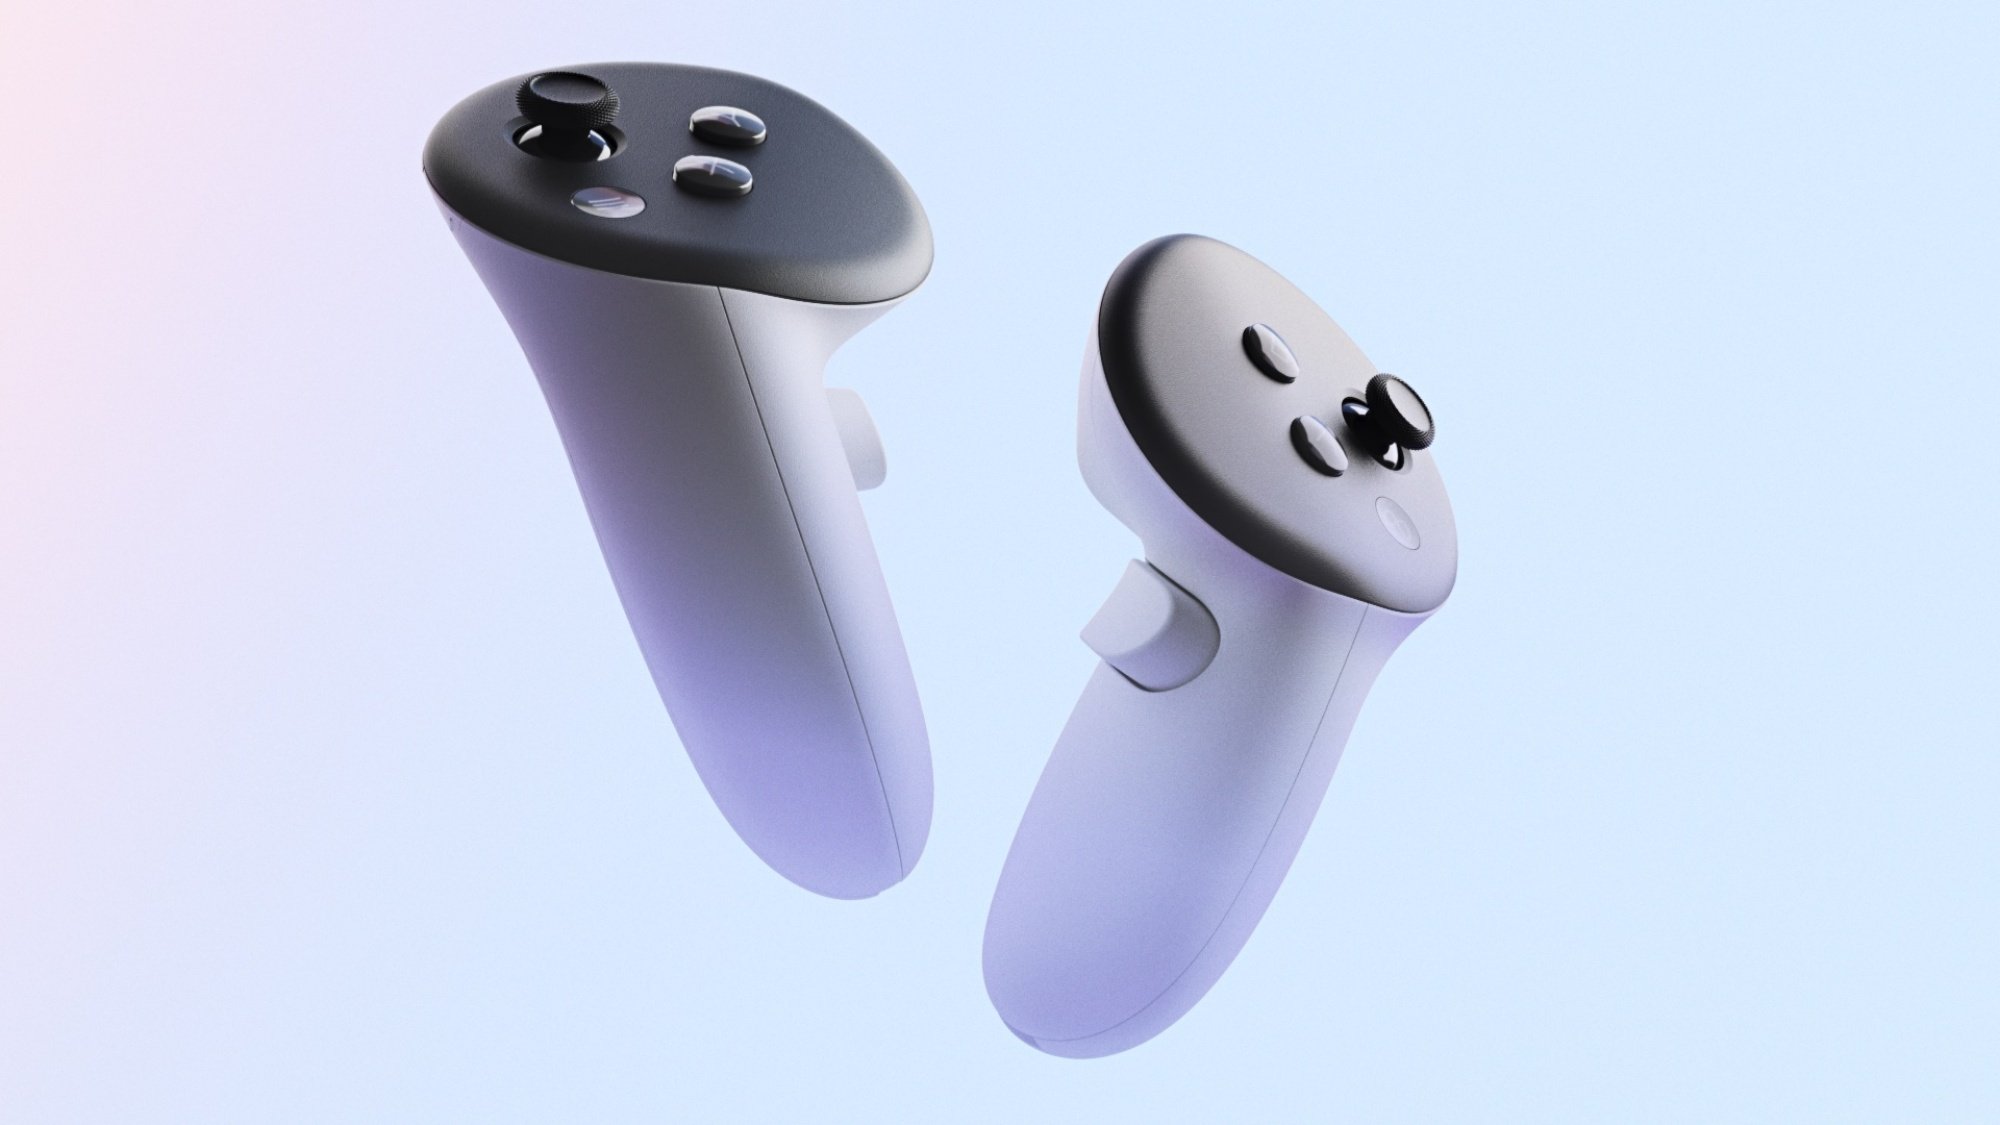 The Quest 3 Touch controllers